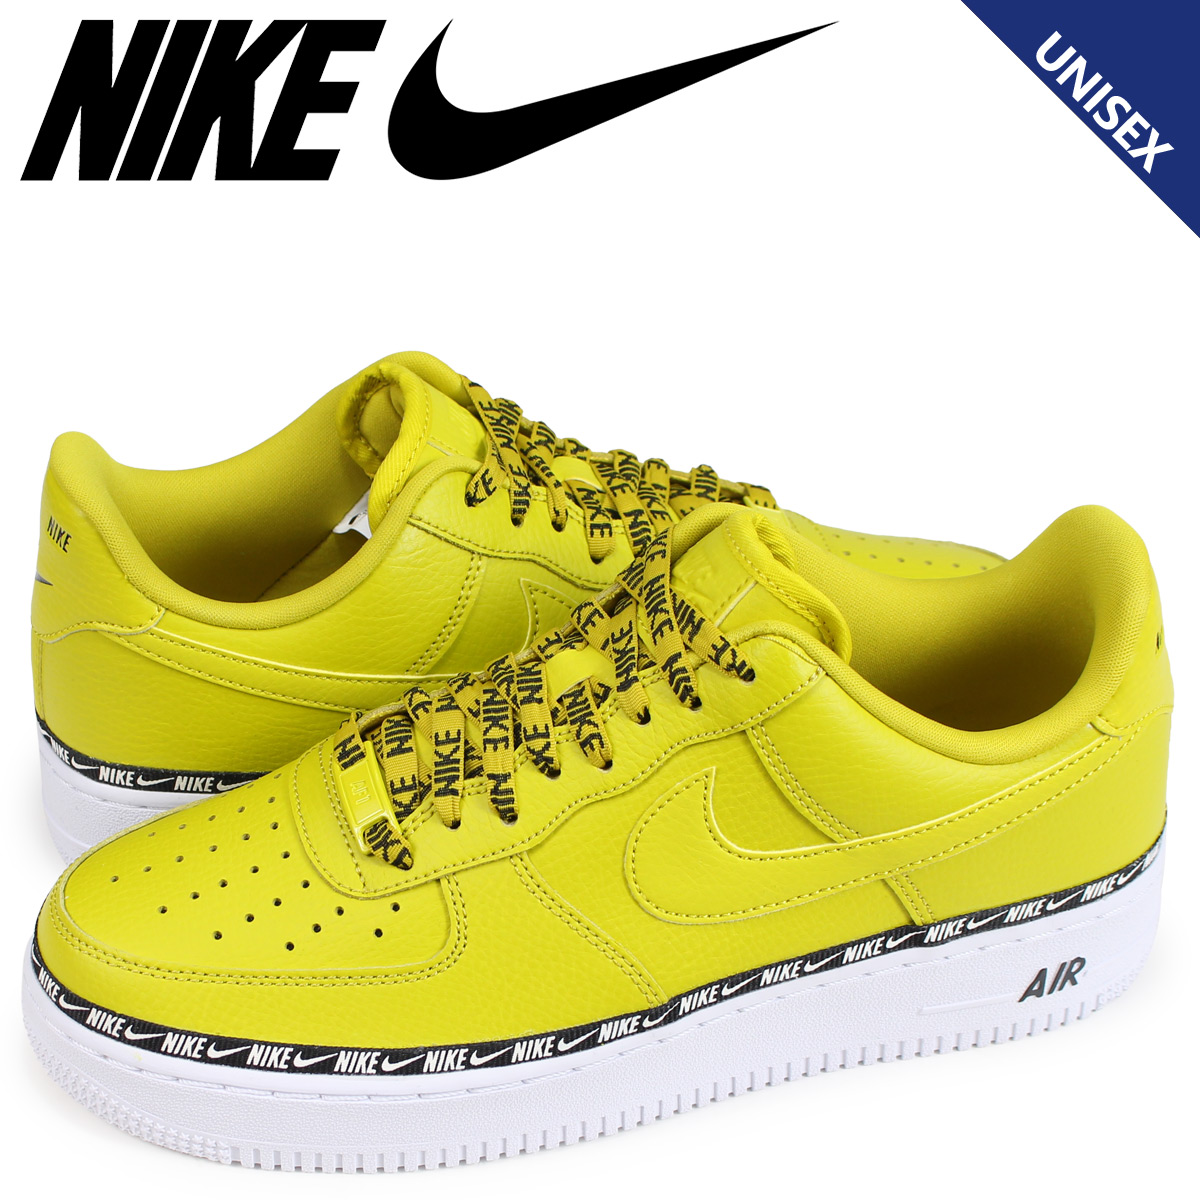 nike yellow air force 1 07 se premium trainers